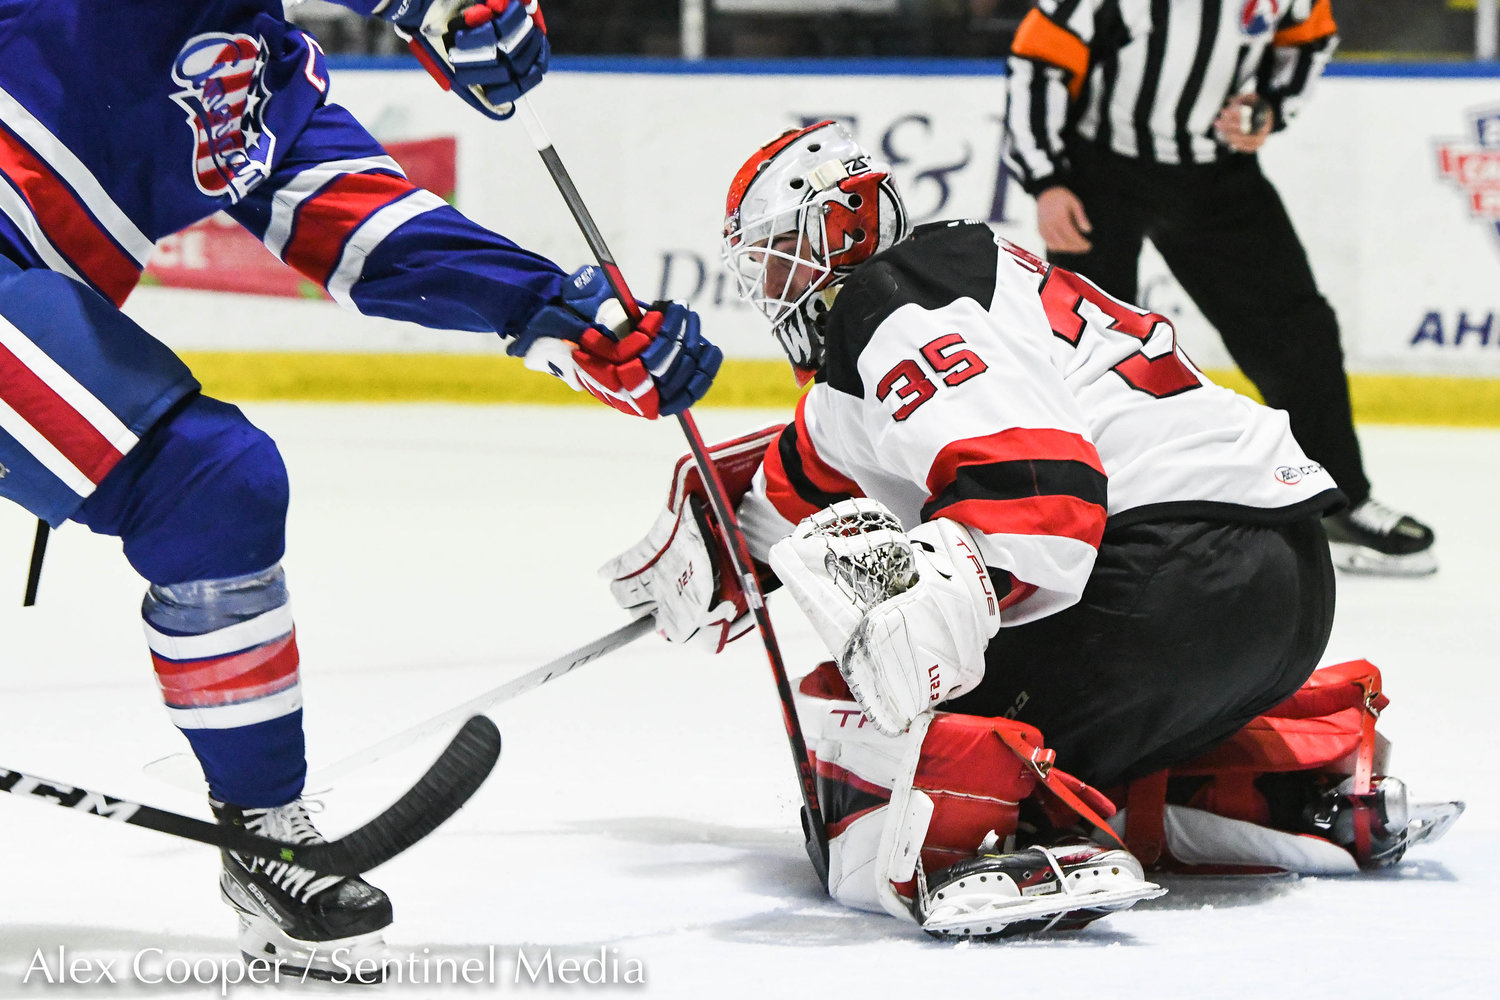 Comets goalie Nico Daws blocks a shot during the playoff game against Rochester on Saturday.